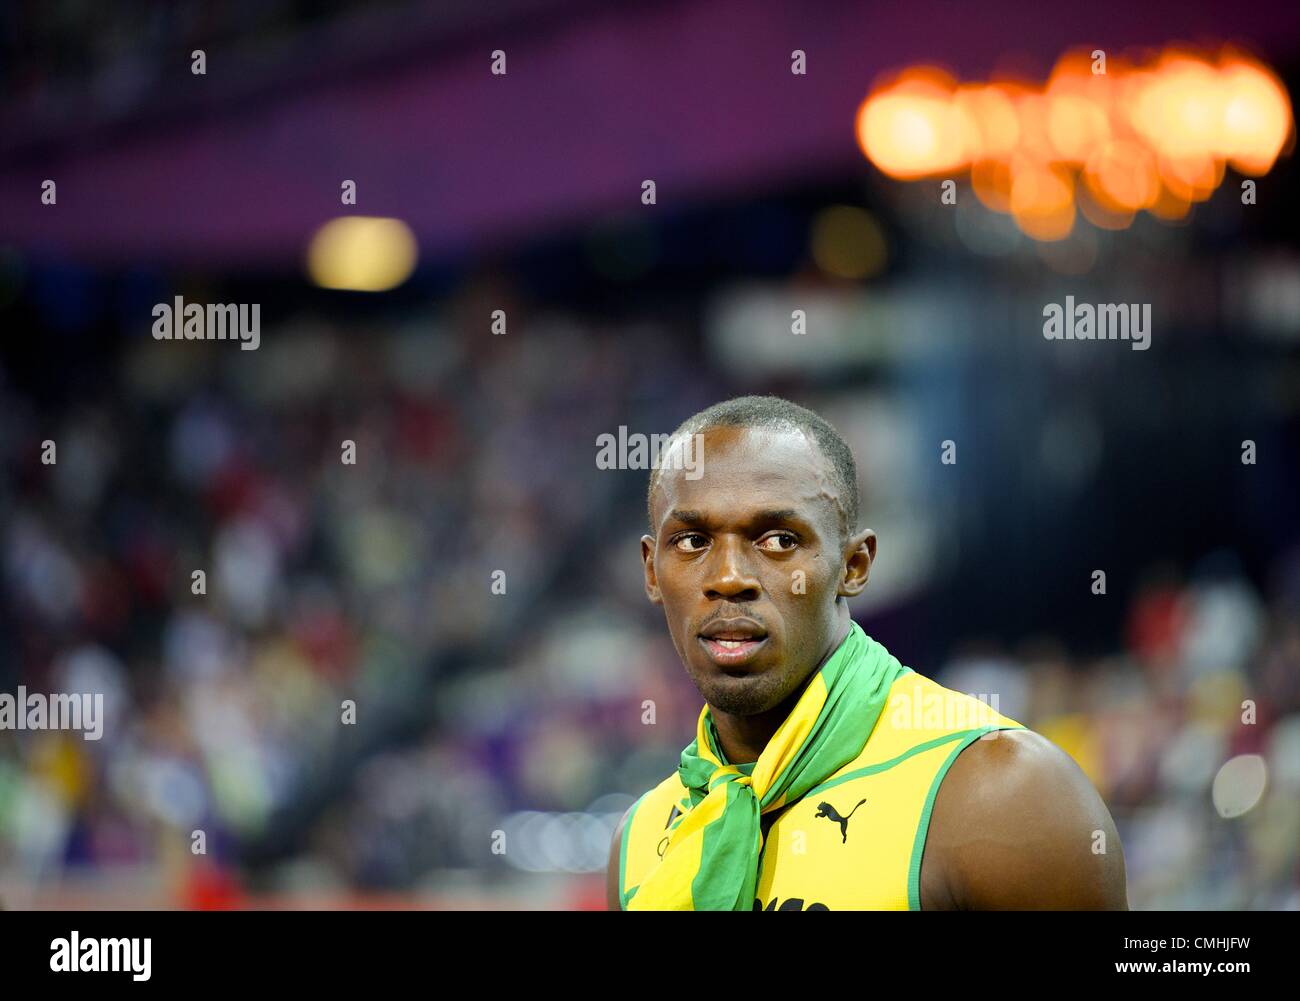 Aug. 11, 2012 - London, England, United Kingdom - USAIN BOLT stares towards the gathering media as the Jamaican 4x100m relay team is interviewed by the media after winning gold and setting a new world record of 36.84 seconds during the 2012 London Summer Olympics. (Credit Image: © Mark Makela/ZUMAPRESS.com) Stock Photo